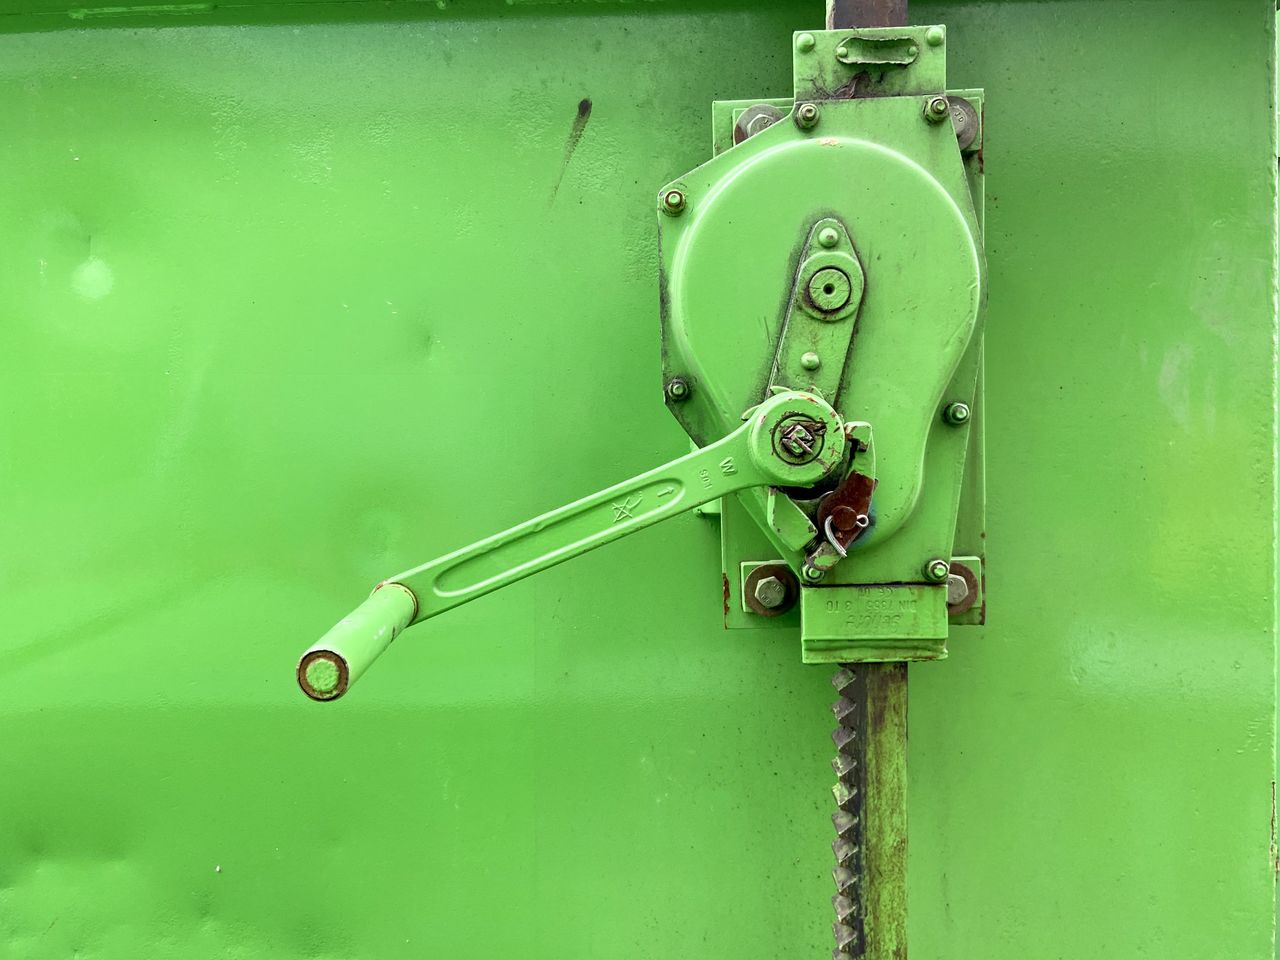 CLOSE-UP OF OLD MACHINE PART WITH GREEN LIGHT